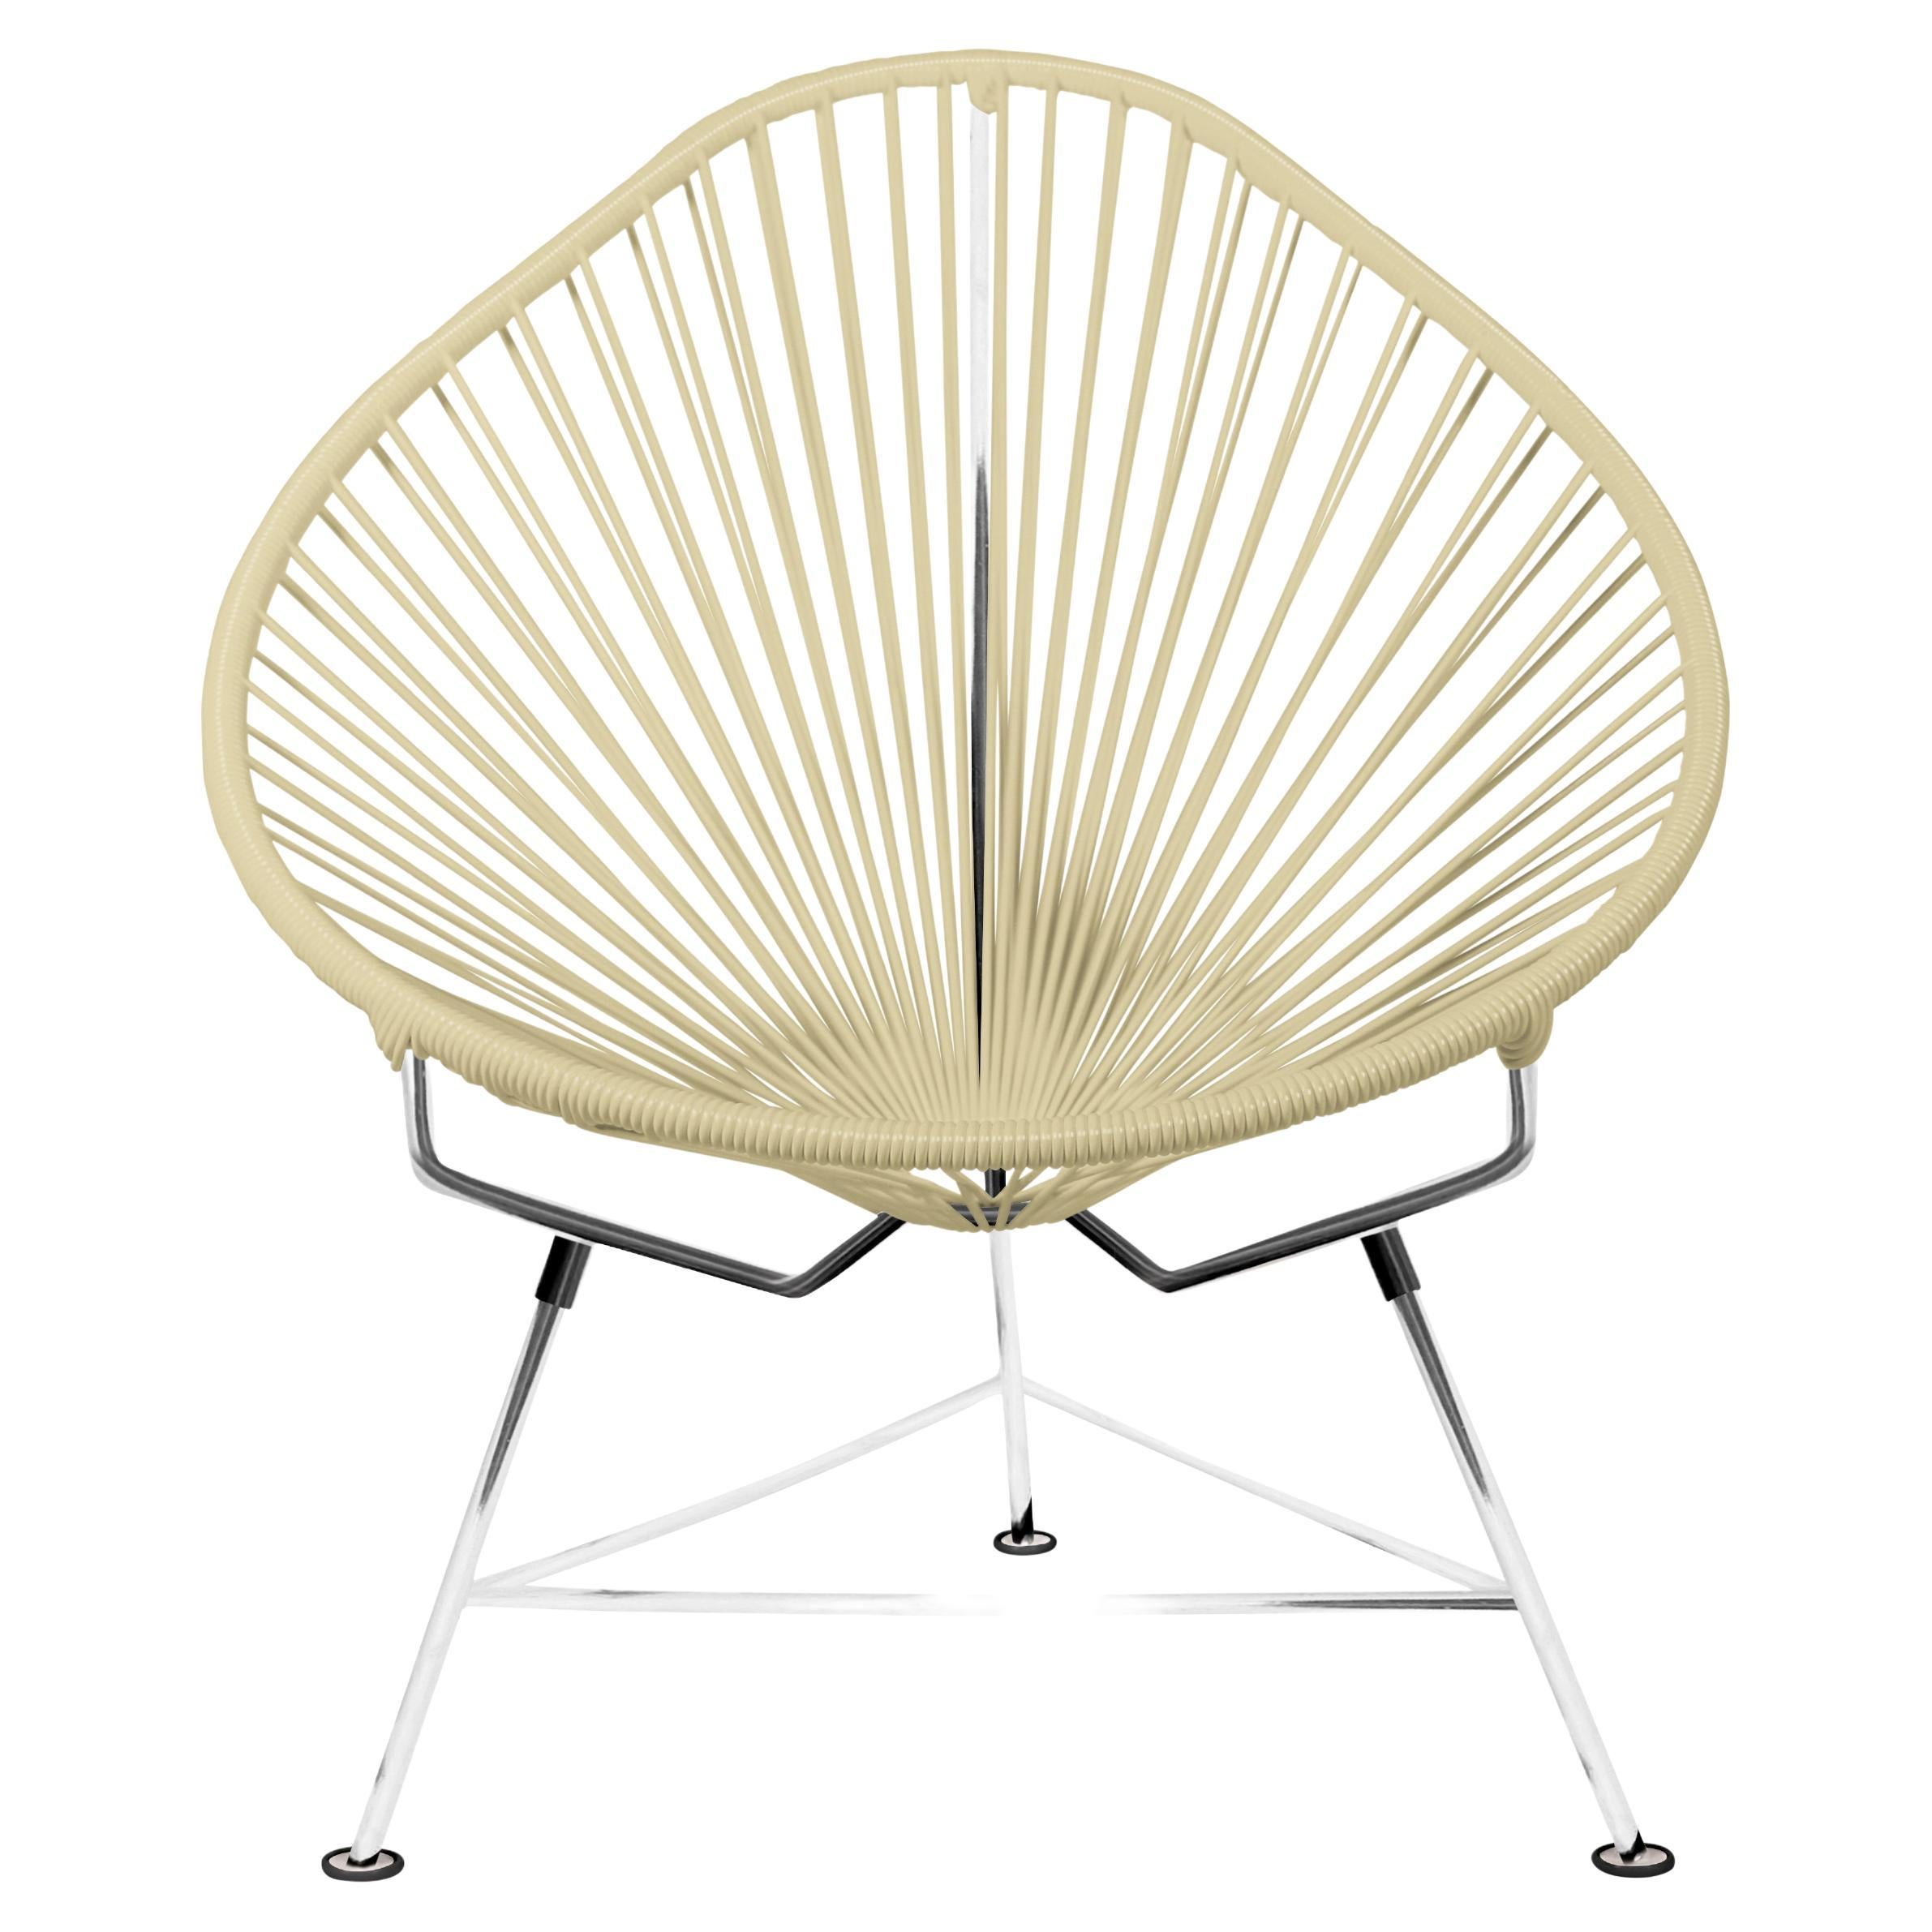 Innit Designs Acapulco Chair Ivory Weave on Chrome Frame